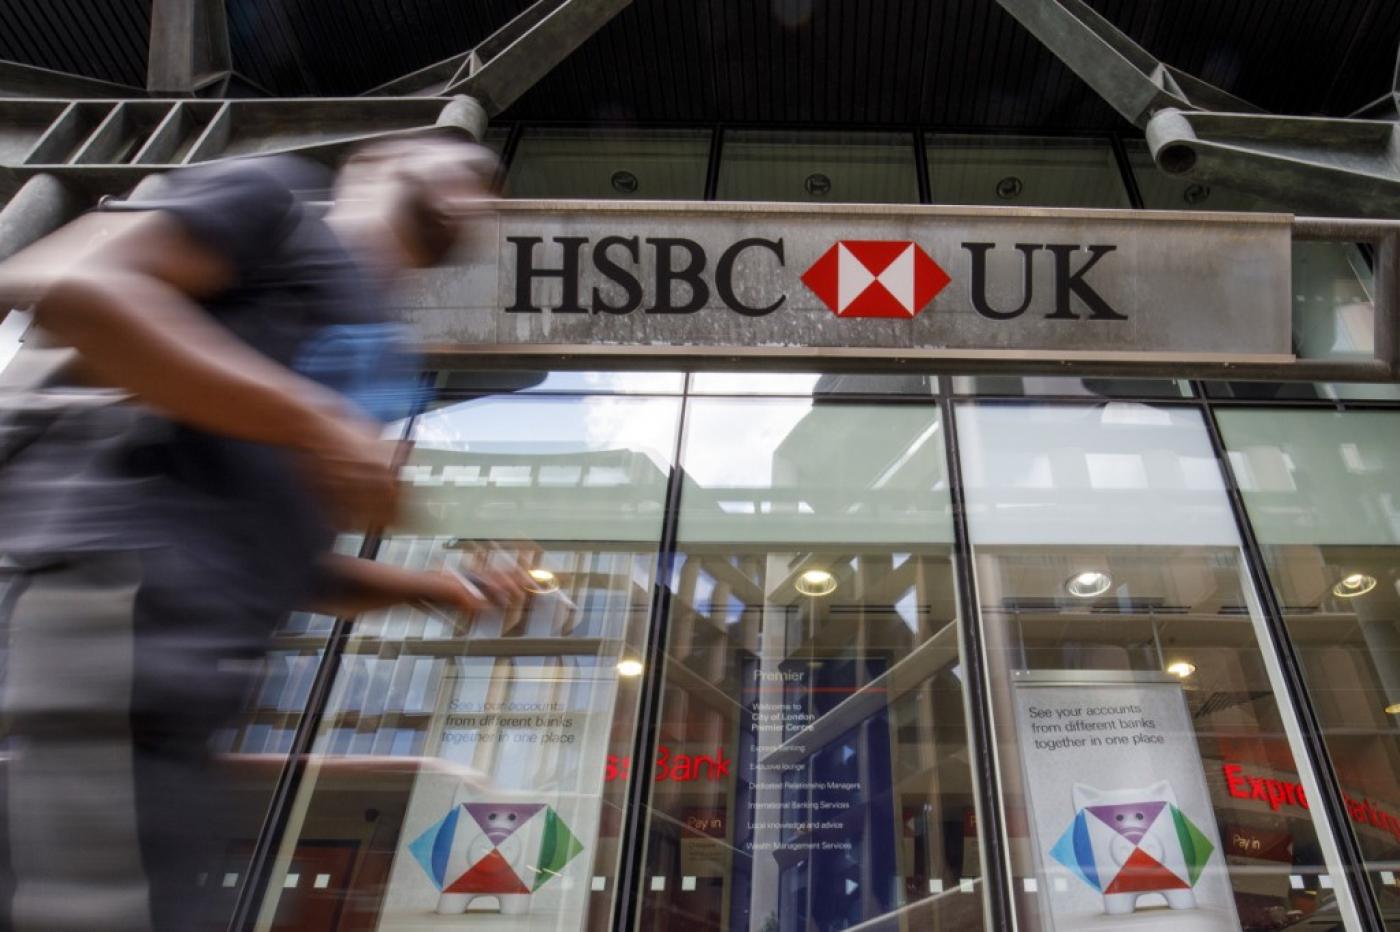 Exclusive: HSBC to Block Donations to Palestinian Aid Charity Interpal